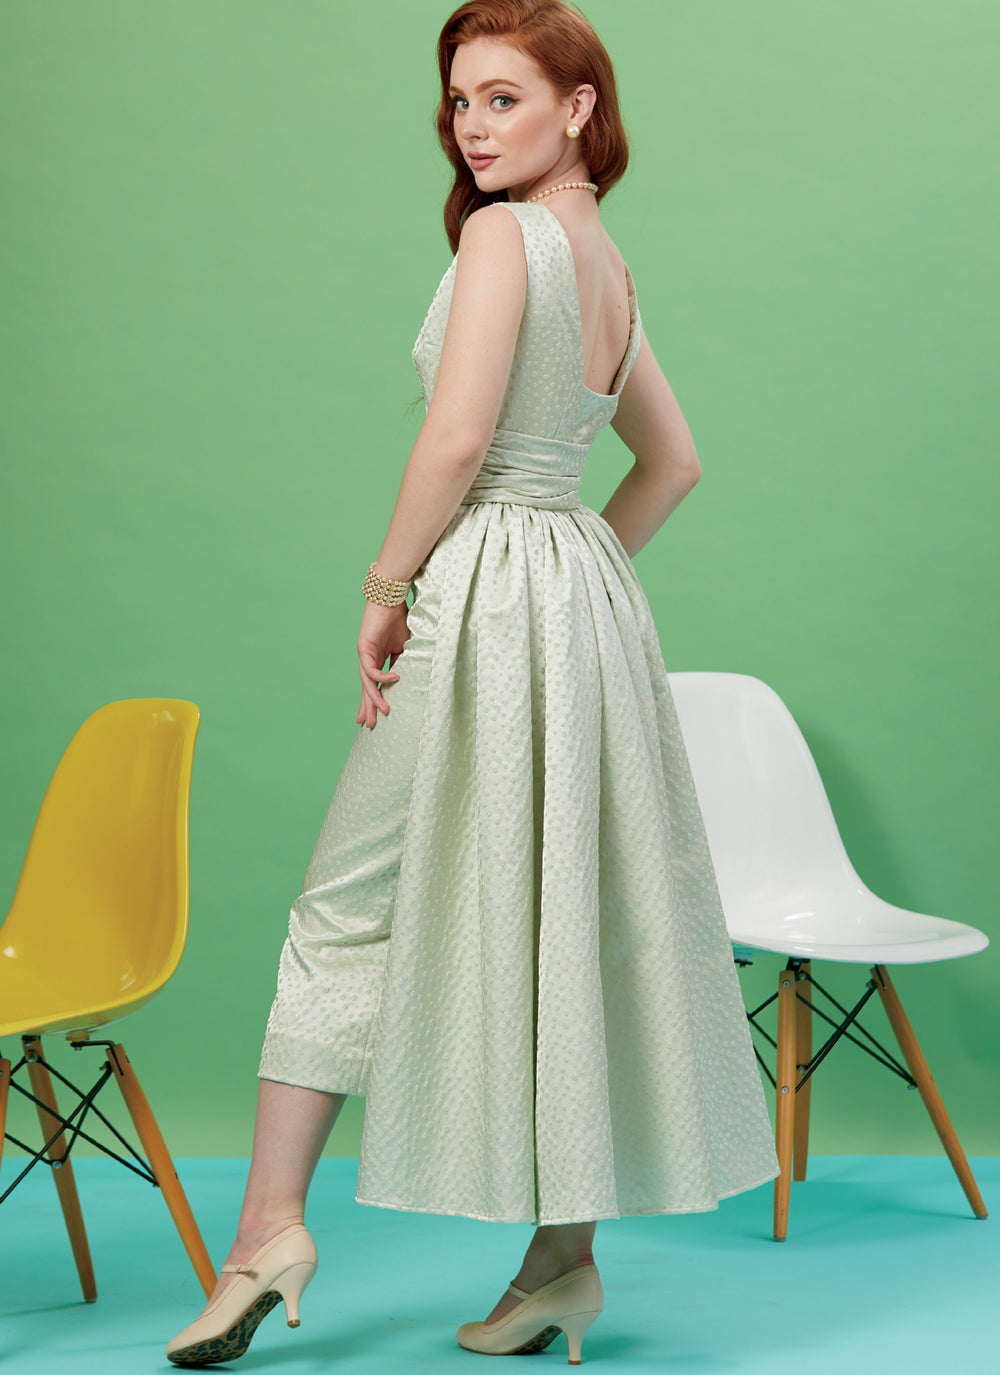 M7897 Misses' Dresses | The Archive Collection from Jaycotts Sewing Supplies